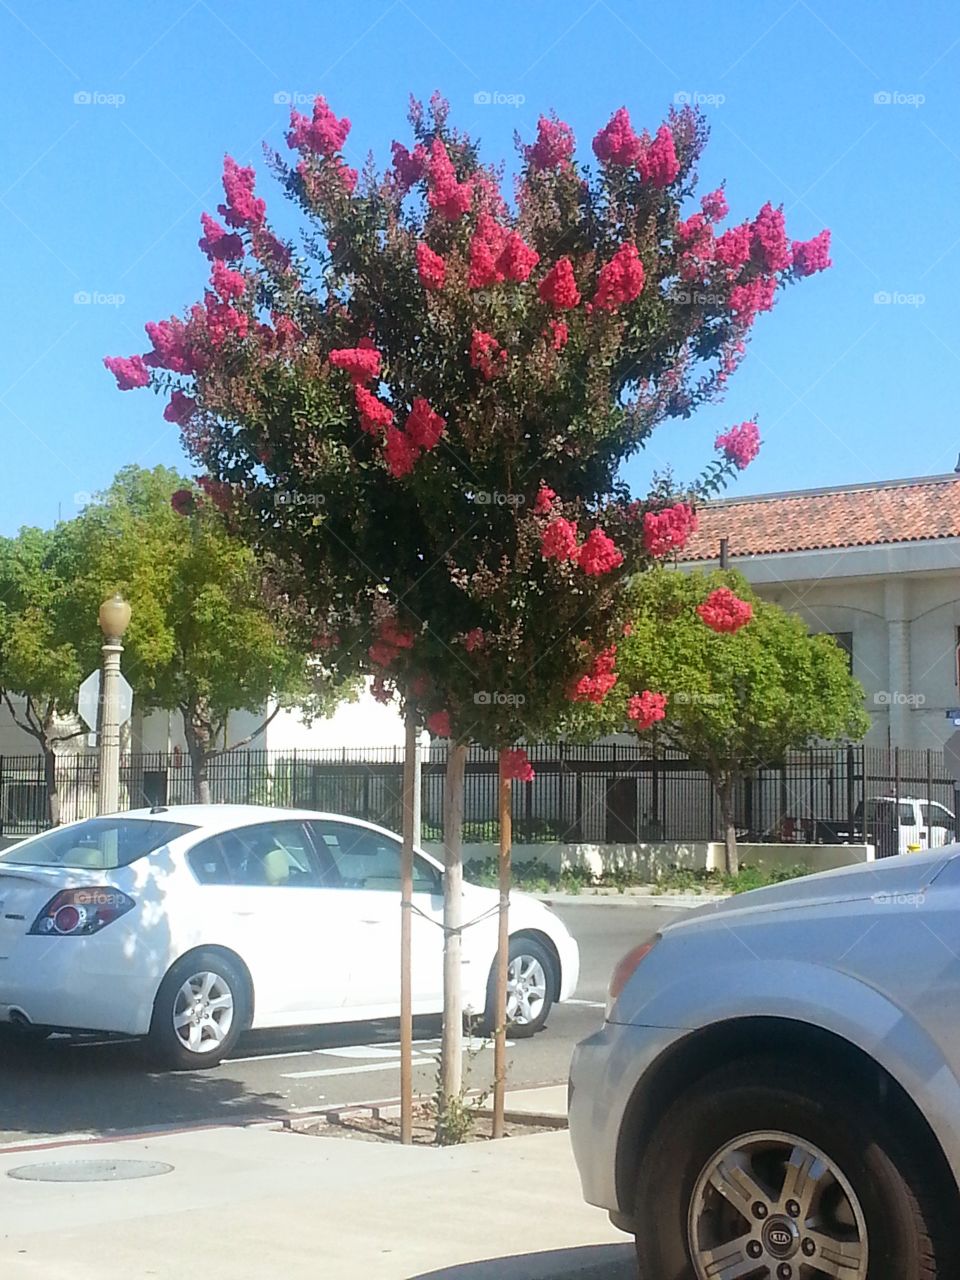 Stand out tree in parking lot